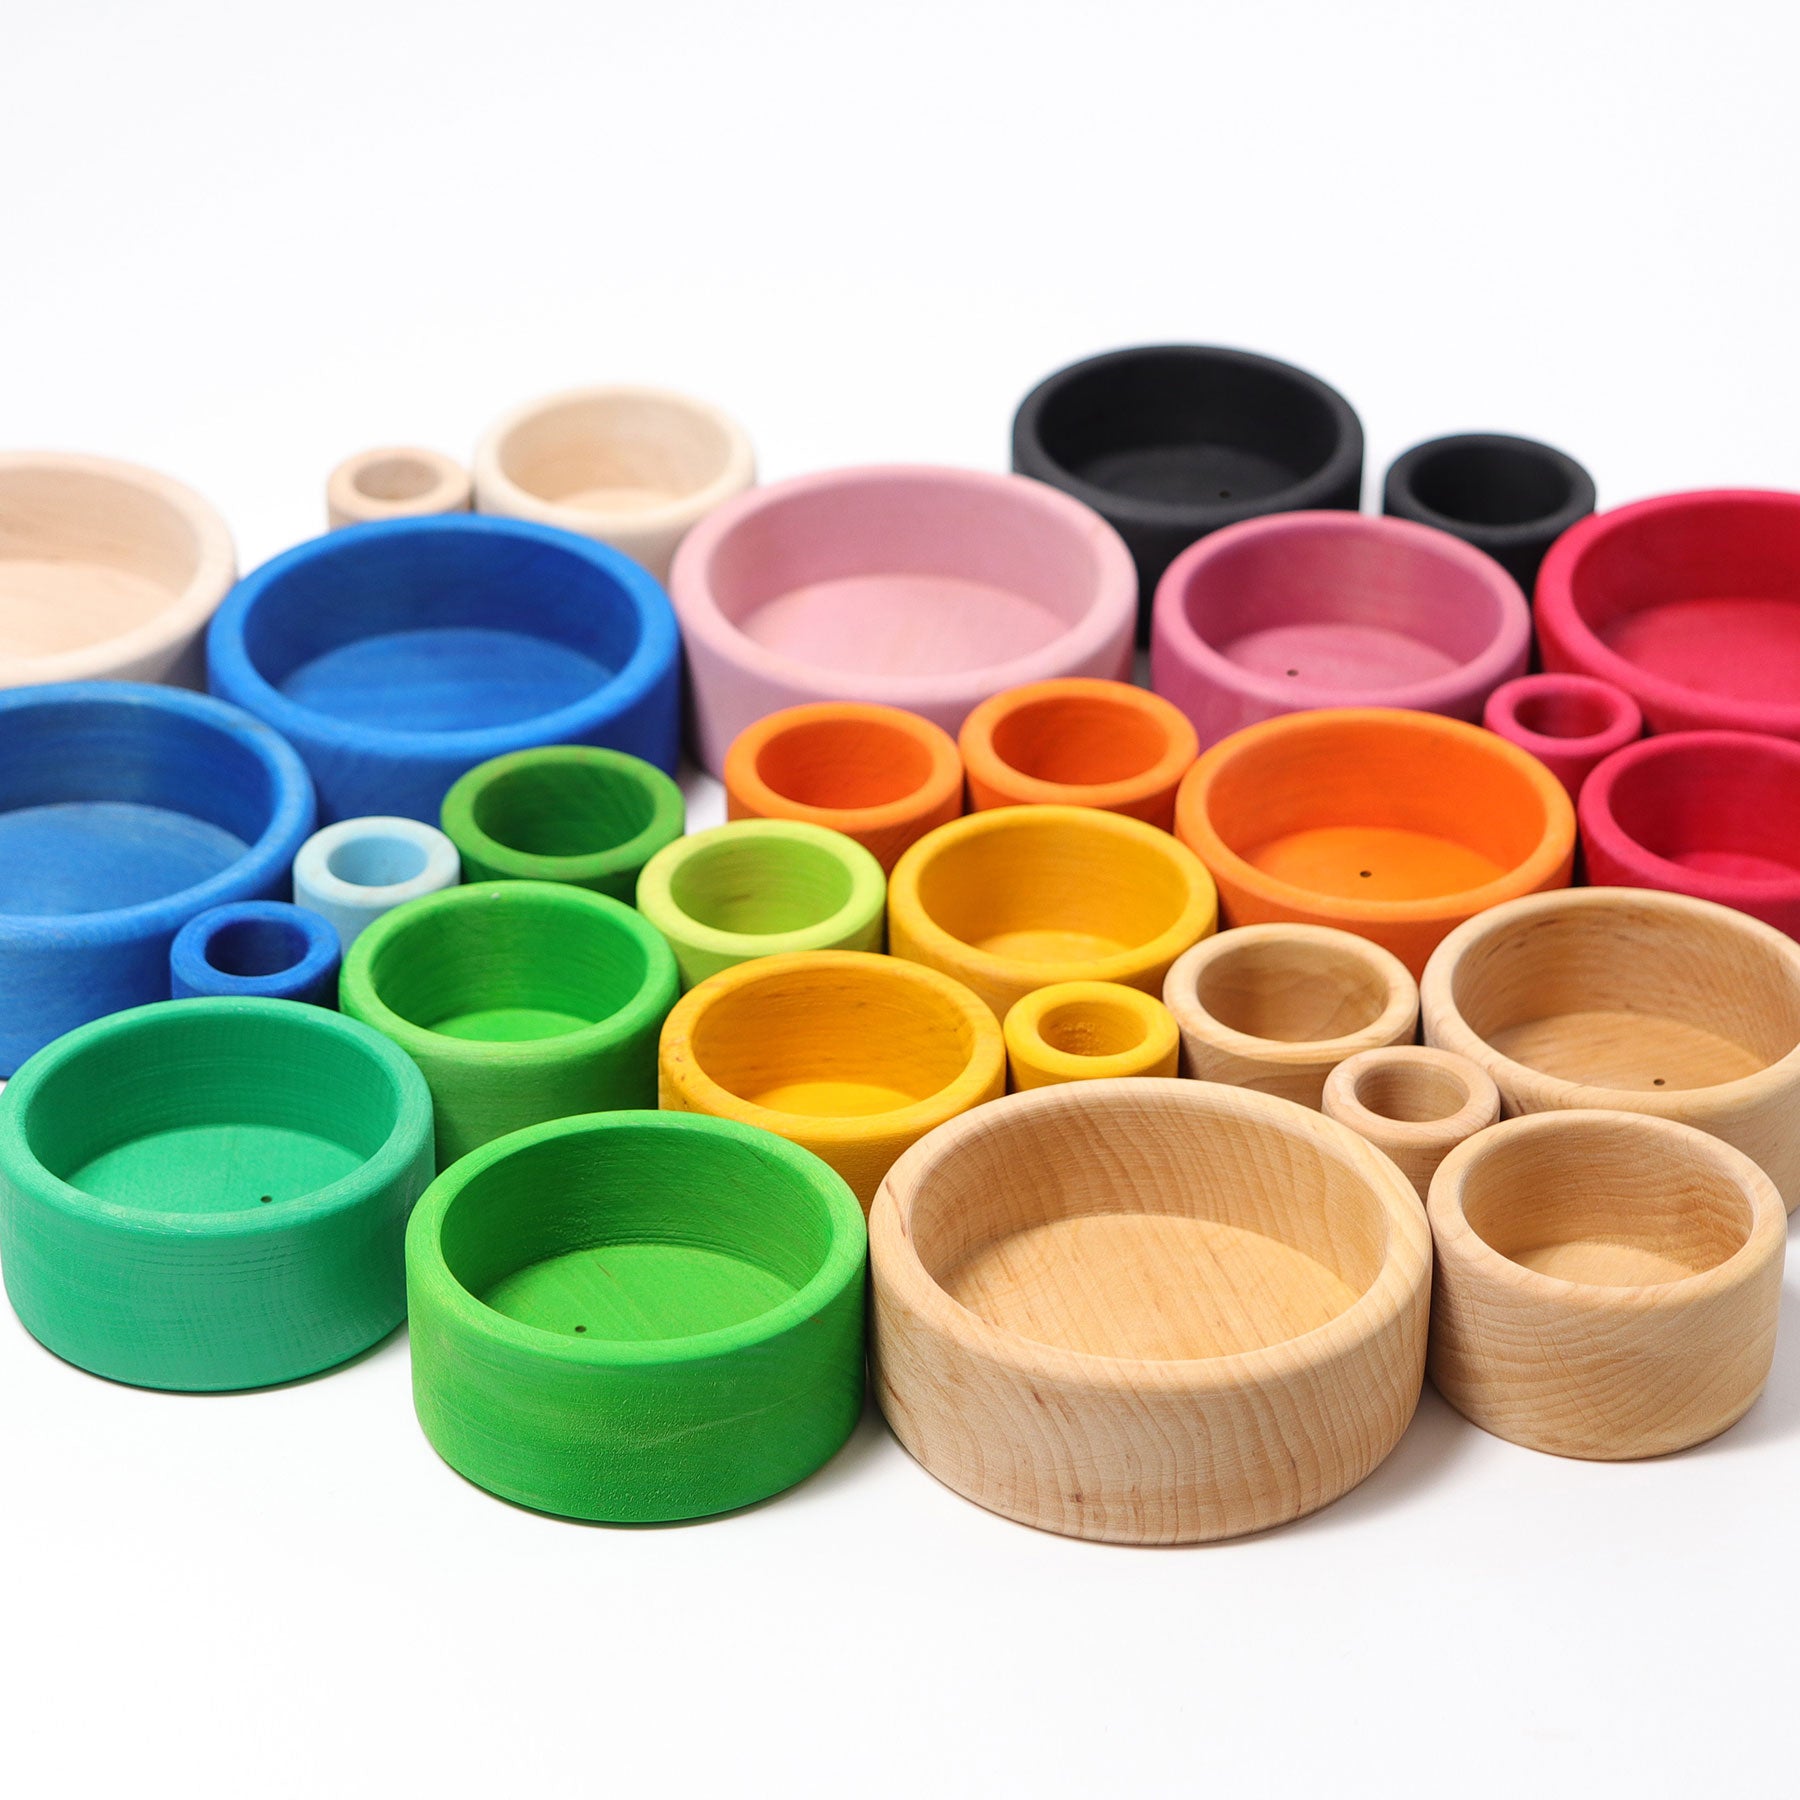 Grimm's Wooden Nesting Bowls